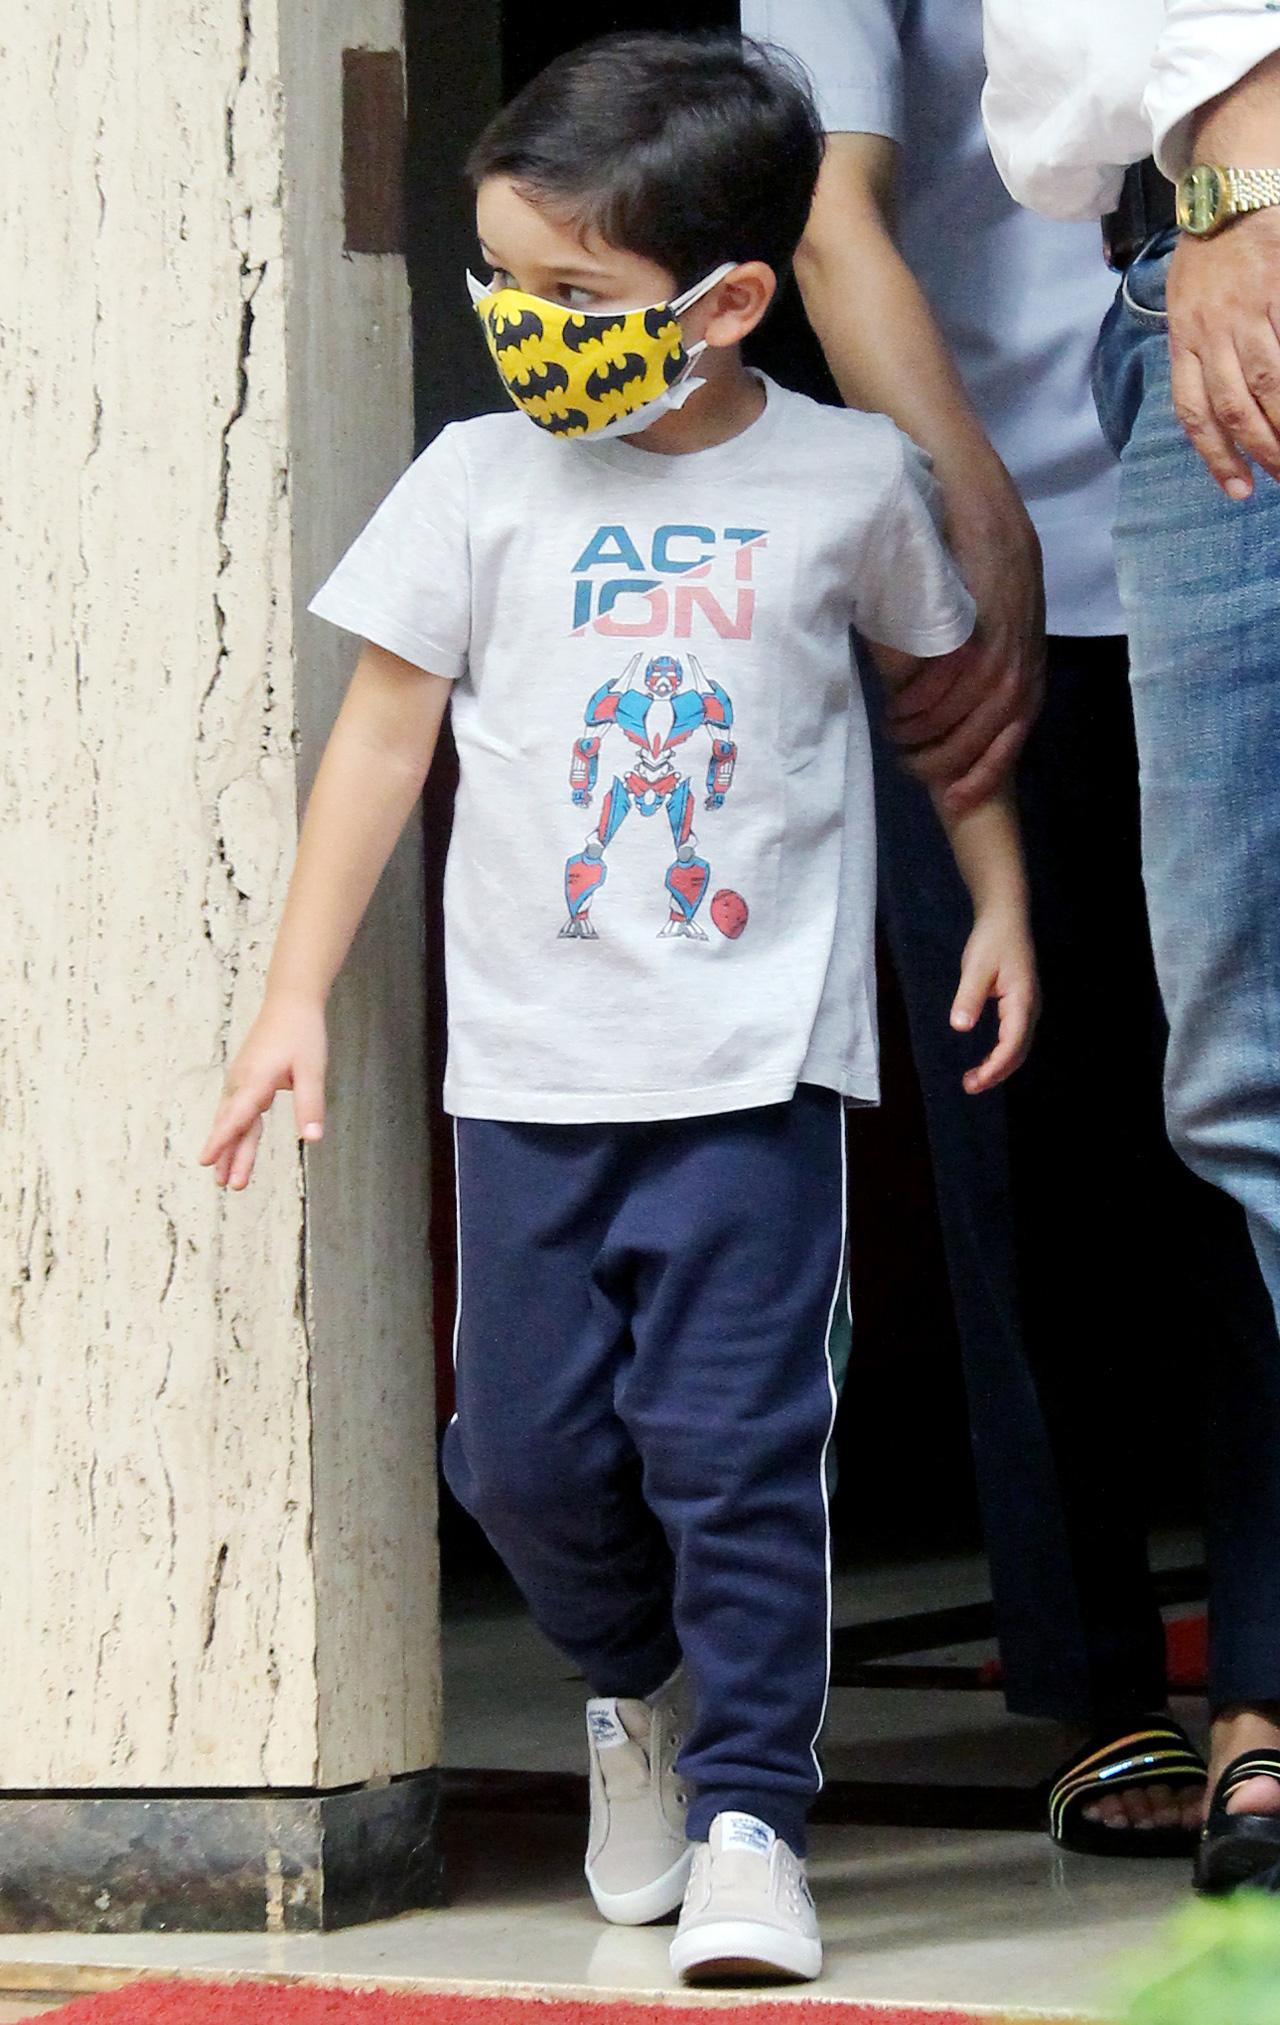 Saif Ali Khan and Kareena Kapoor Khan's son Taimur Ali Khan was also spotted in Bandra. The little tot looked adorable in his Batman face mask.